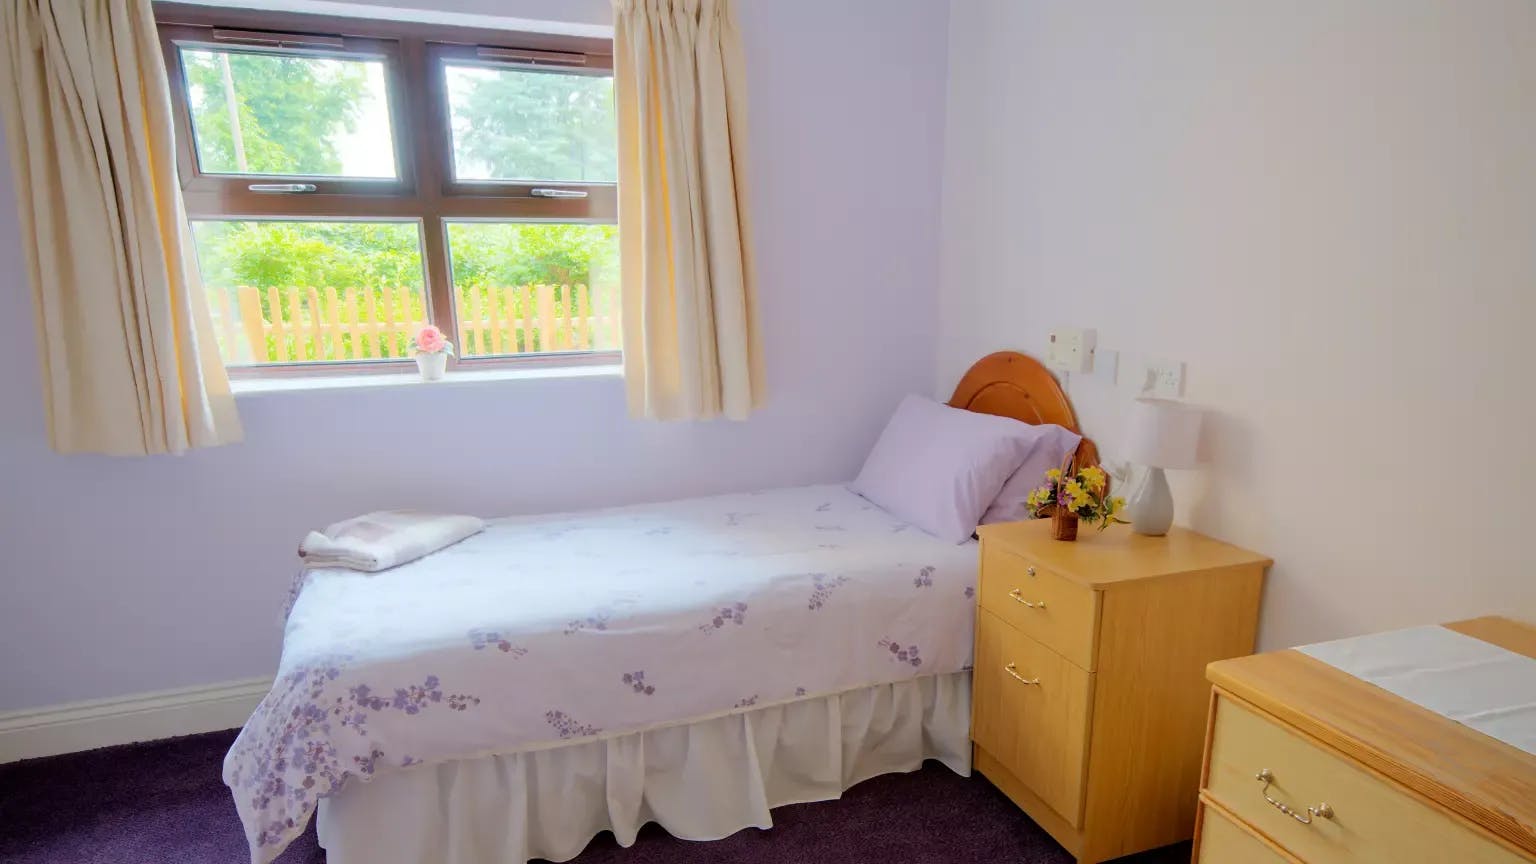 Bedroom of Beane River View care home in Hertford, Hertfordshire